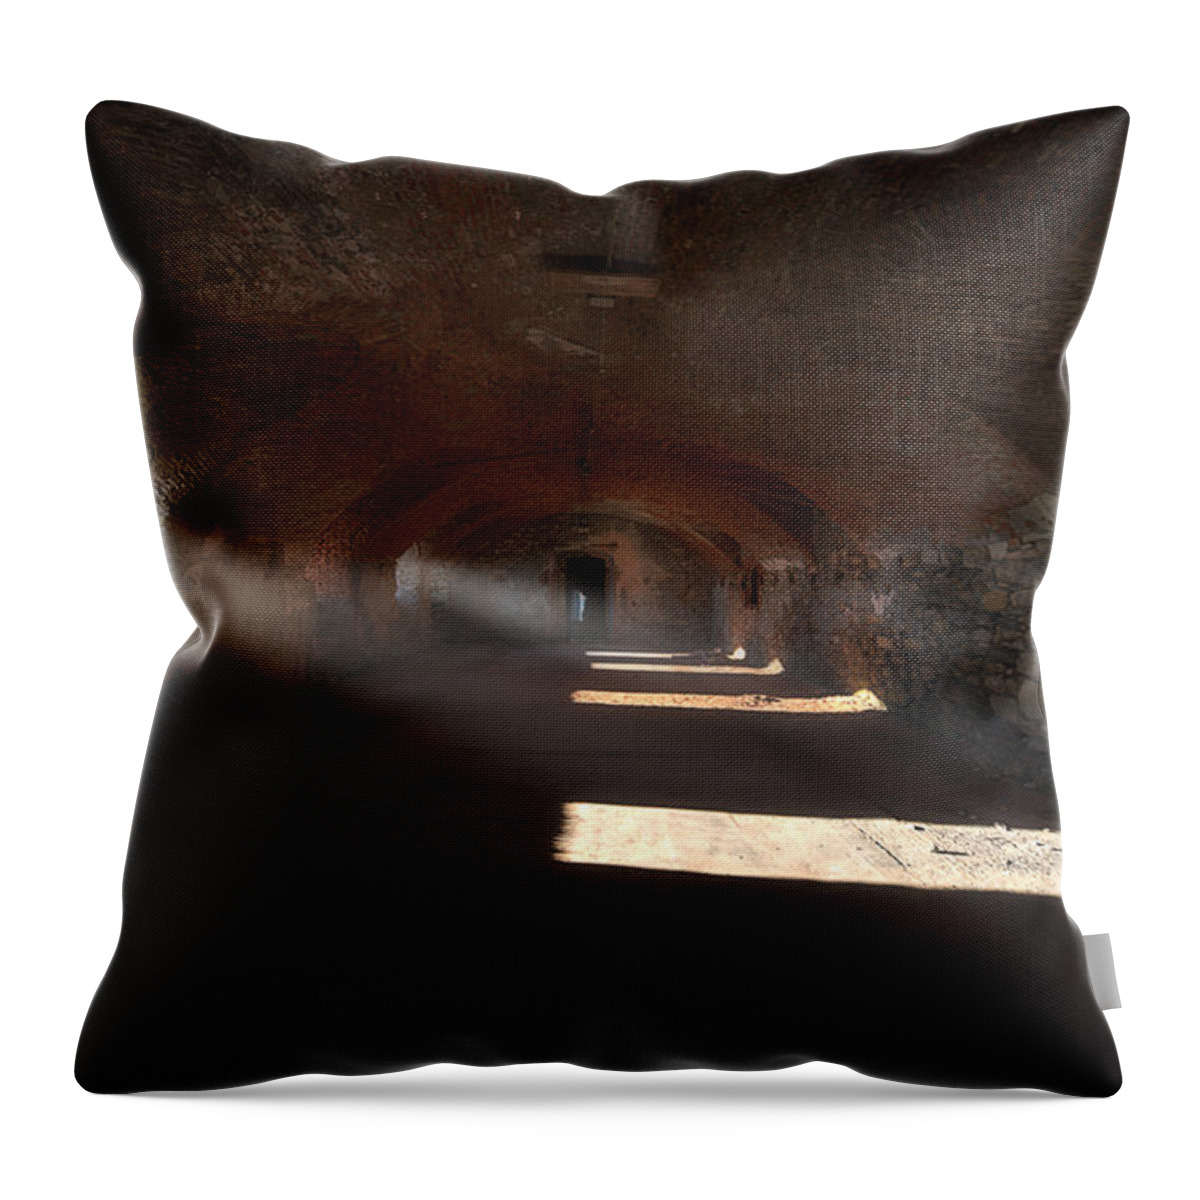 Genoa Forts Throw Pillow featuring the photograph Rays Of Light - Raggi Di Luce by Enrico Pelos